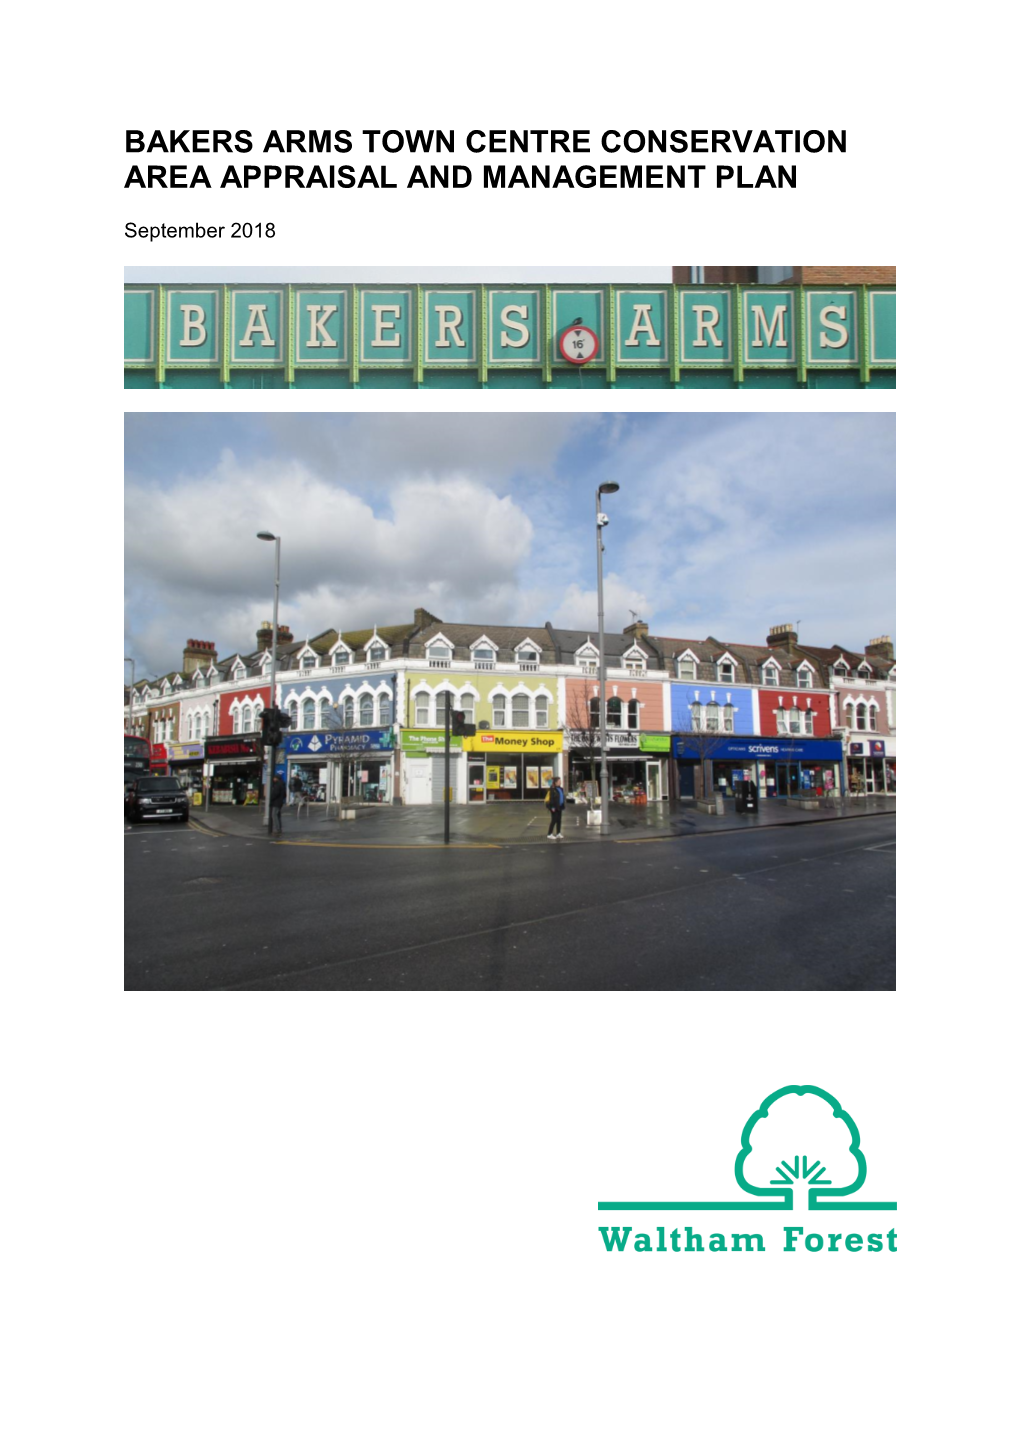 Bakers Arms Town Centre Conservation Area Appraisal and Management Plan